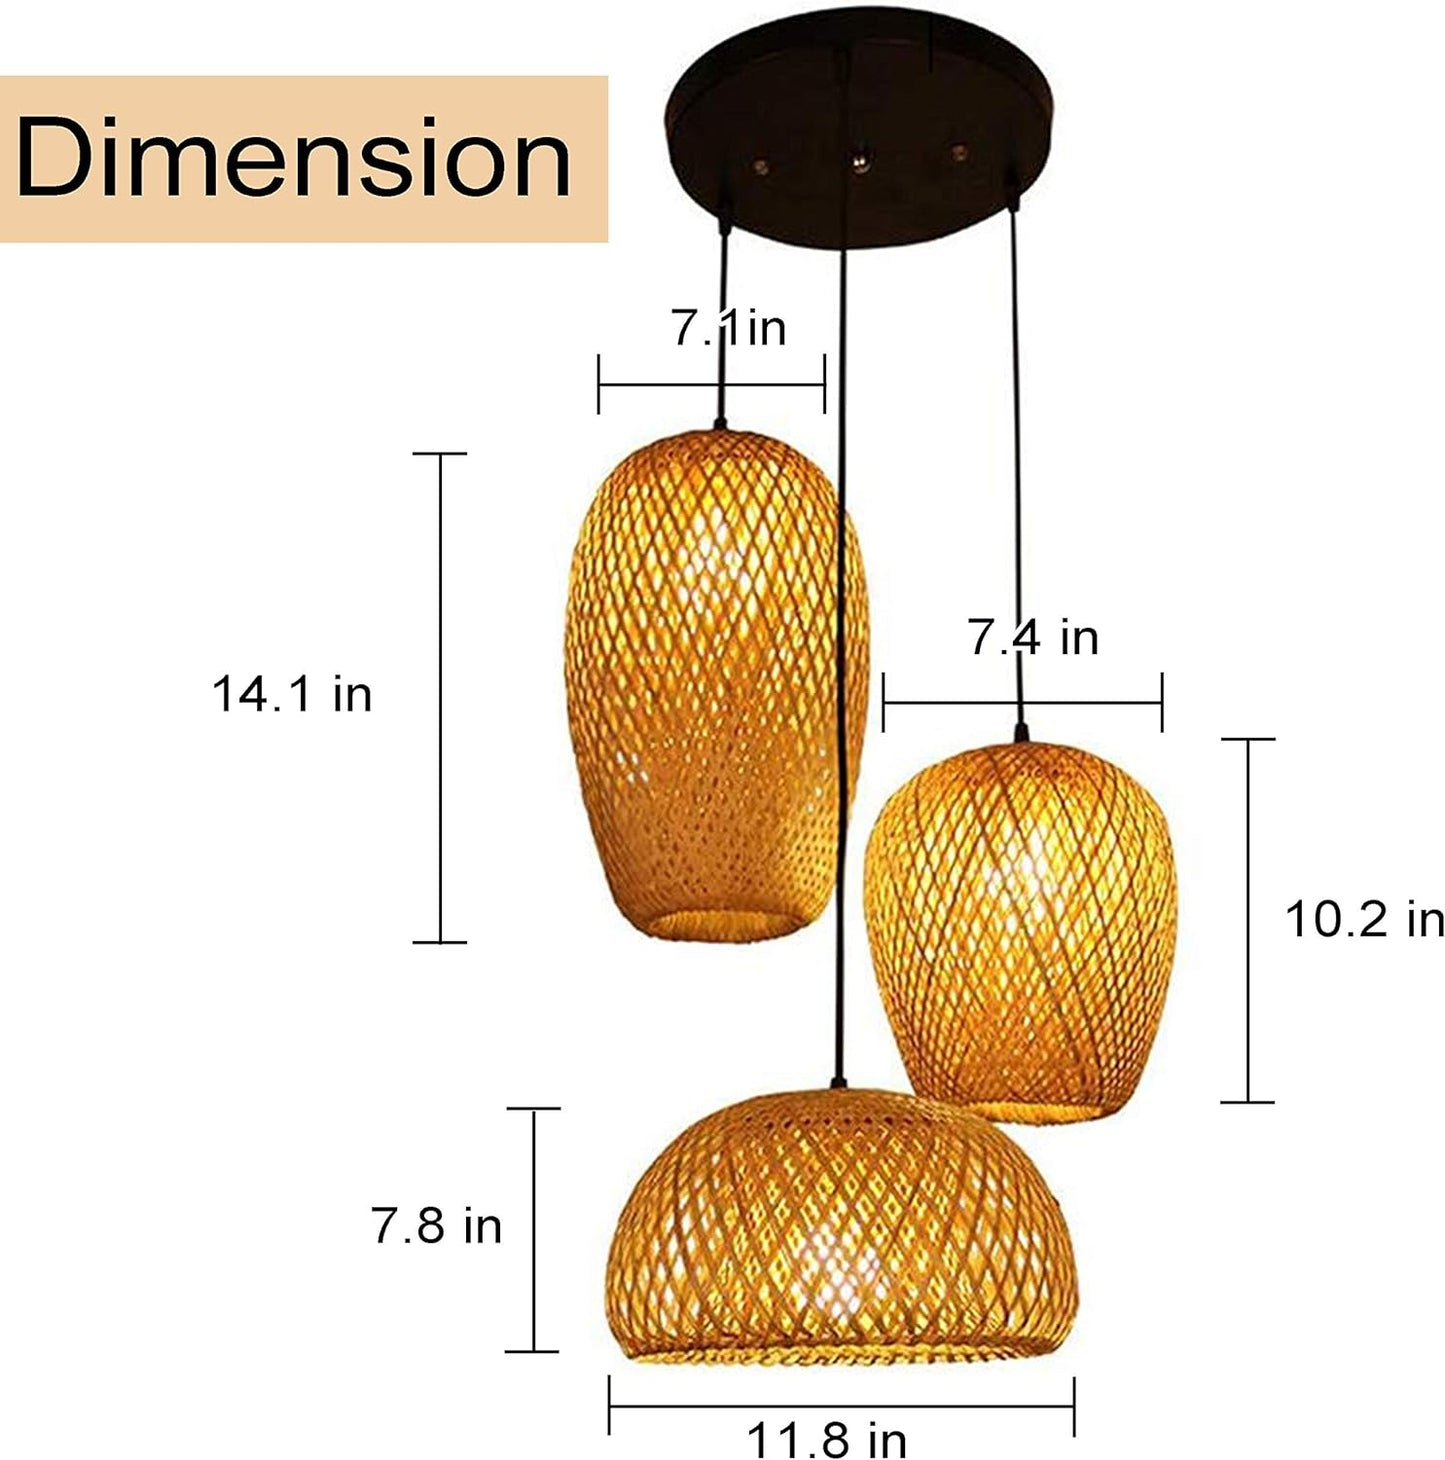 GCQ Bamboo Light Fixtures, 3 Headlights E26 E27 Retro Rustic Bamboo Wicker Rattan Chandelier Ceiling Hanging Light for Living Room Bedroom Farmhouse Restaurant Cafe Teahouse Bar Dining Room Club